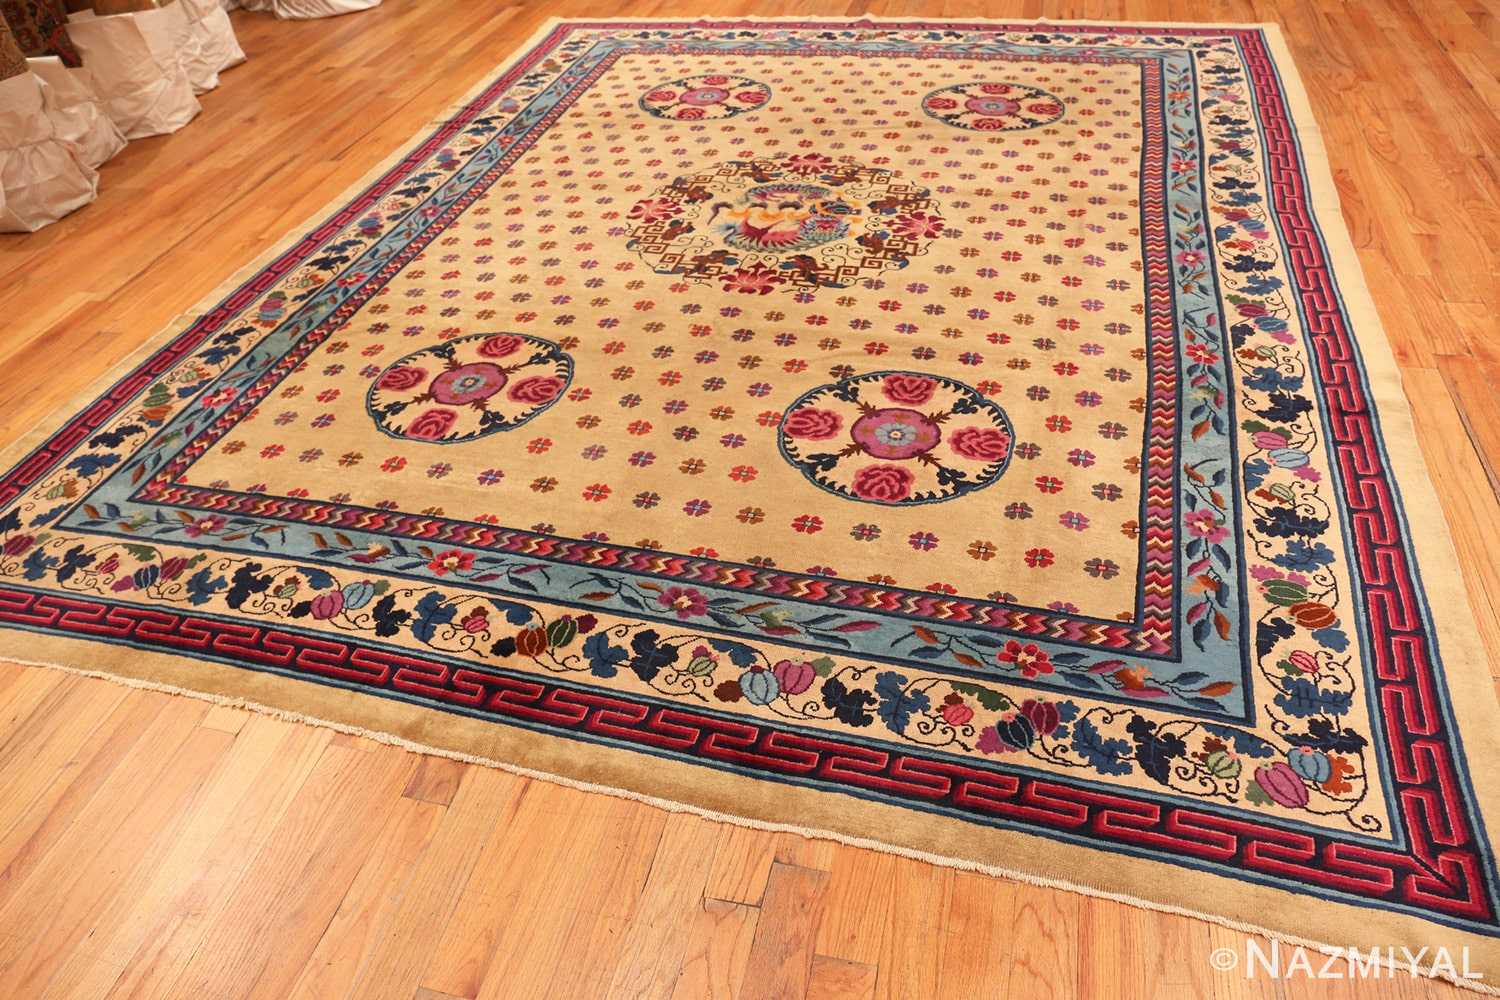 Full antique Chinese rug 47040 by Nazmiyal